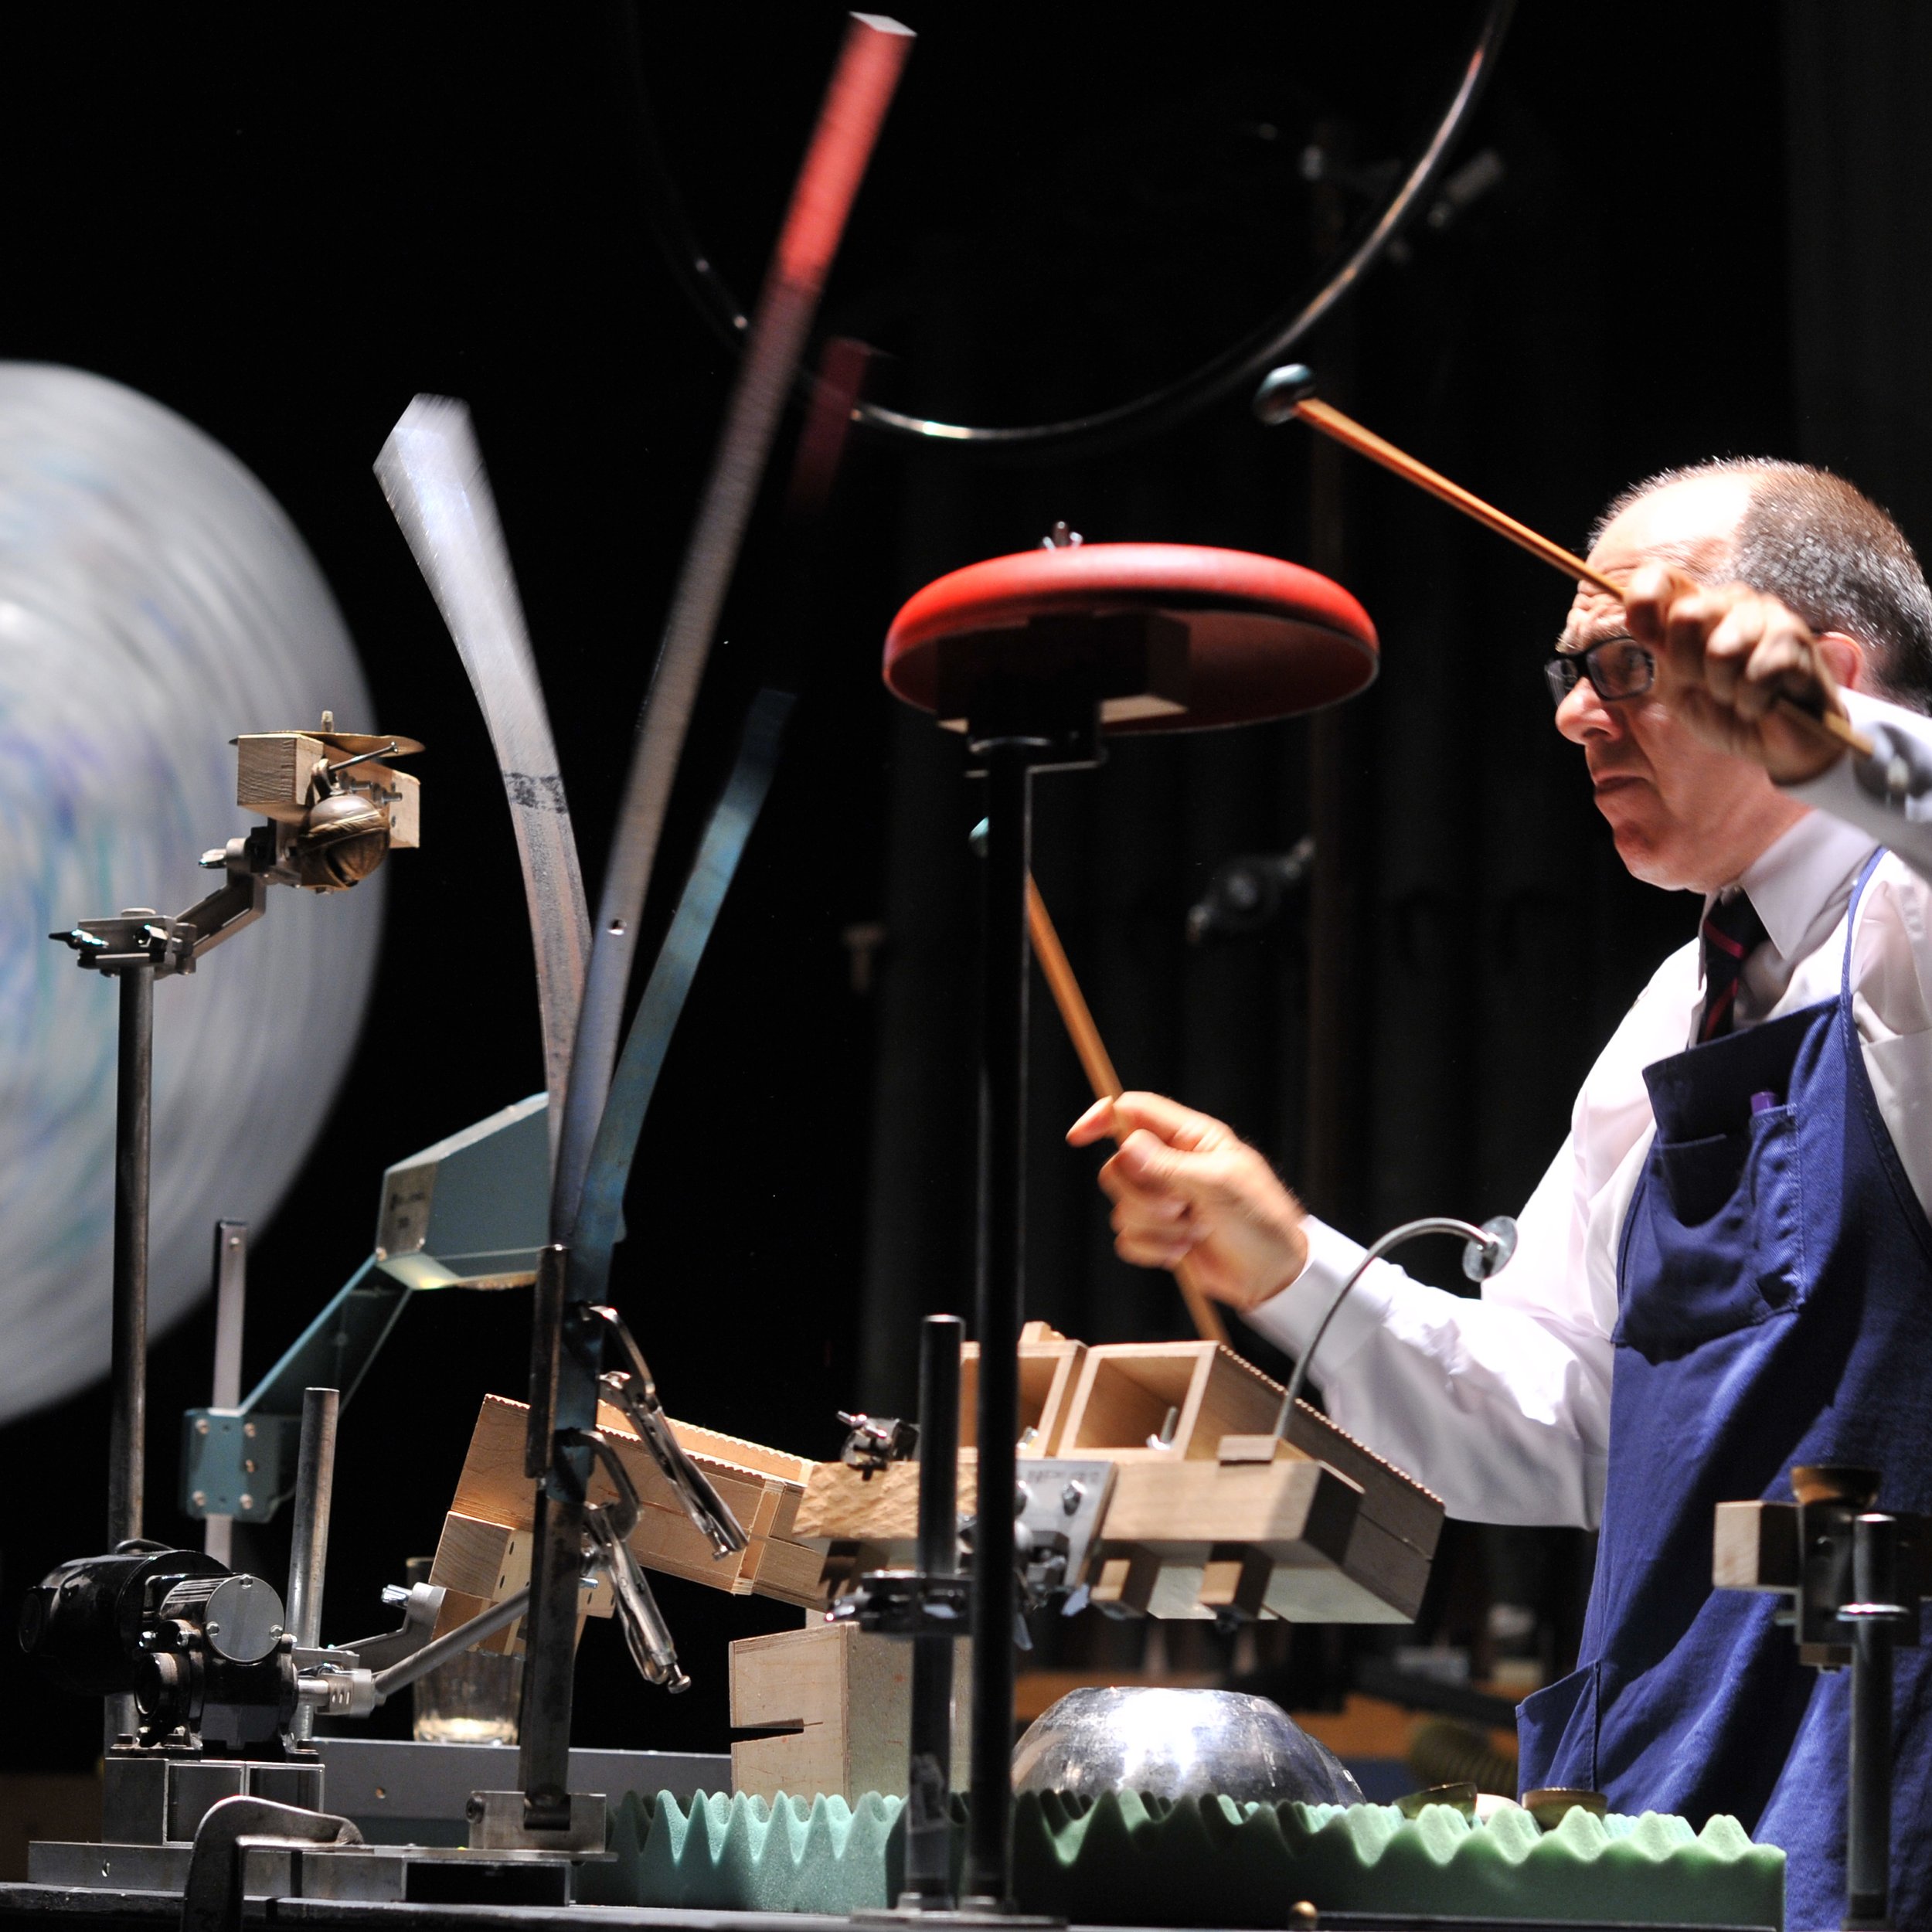 ZS_Schick-Machine_Steven-Schick-at-Percussion-Table-with_Big-Disc-turning_Photo-by-Chi-Wang_3868.jpg